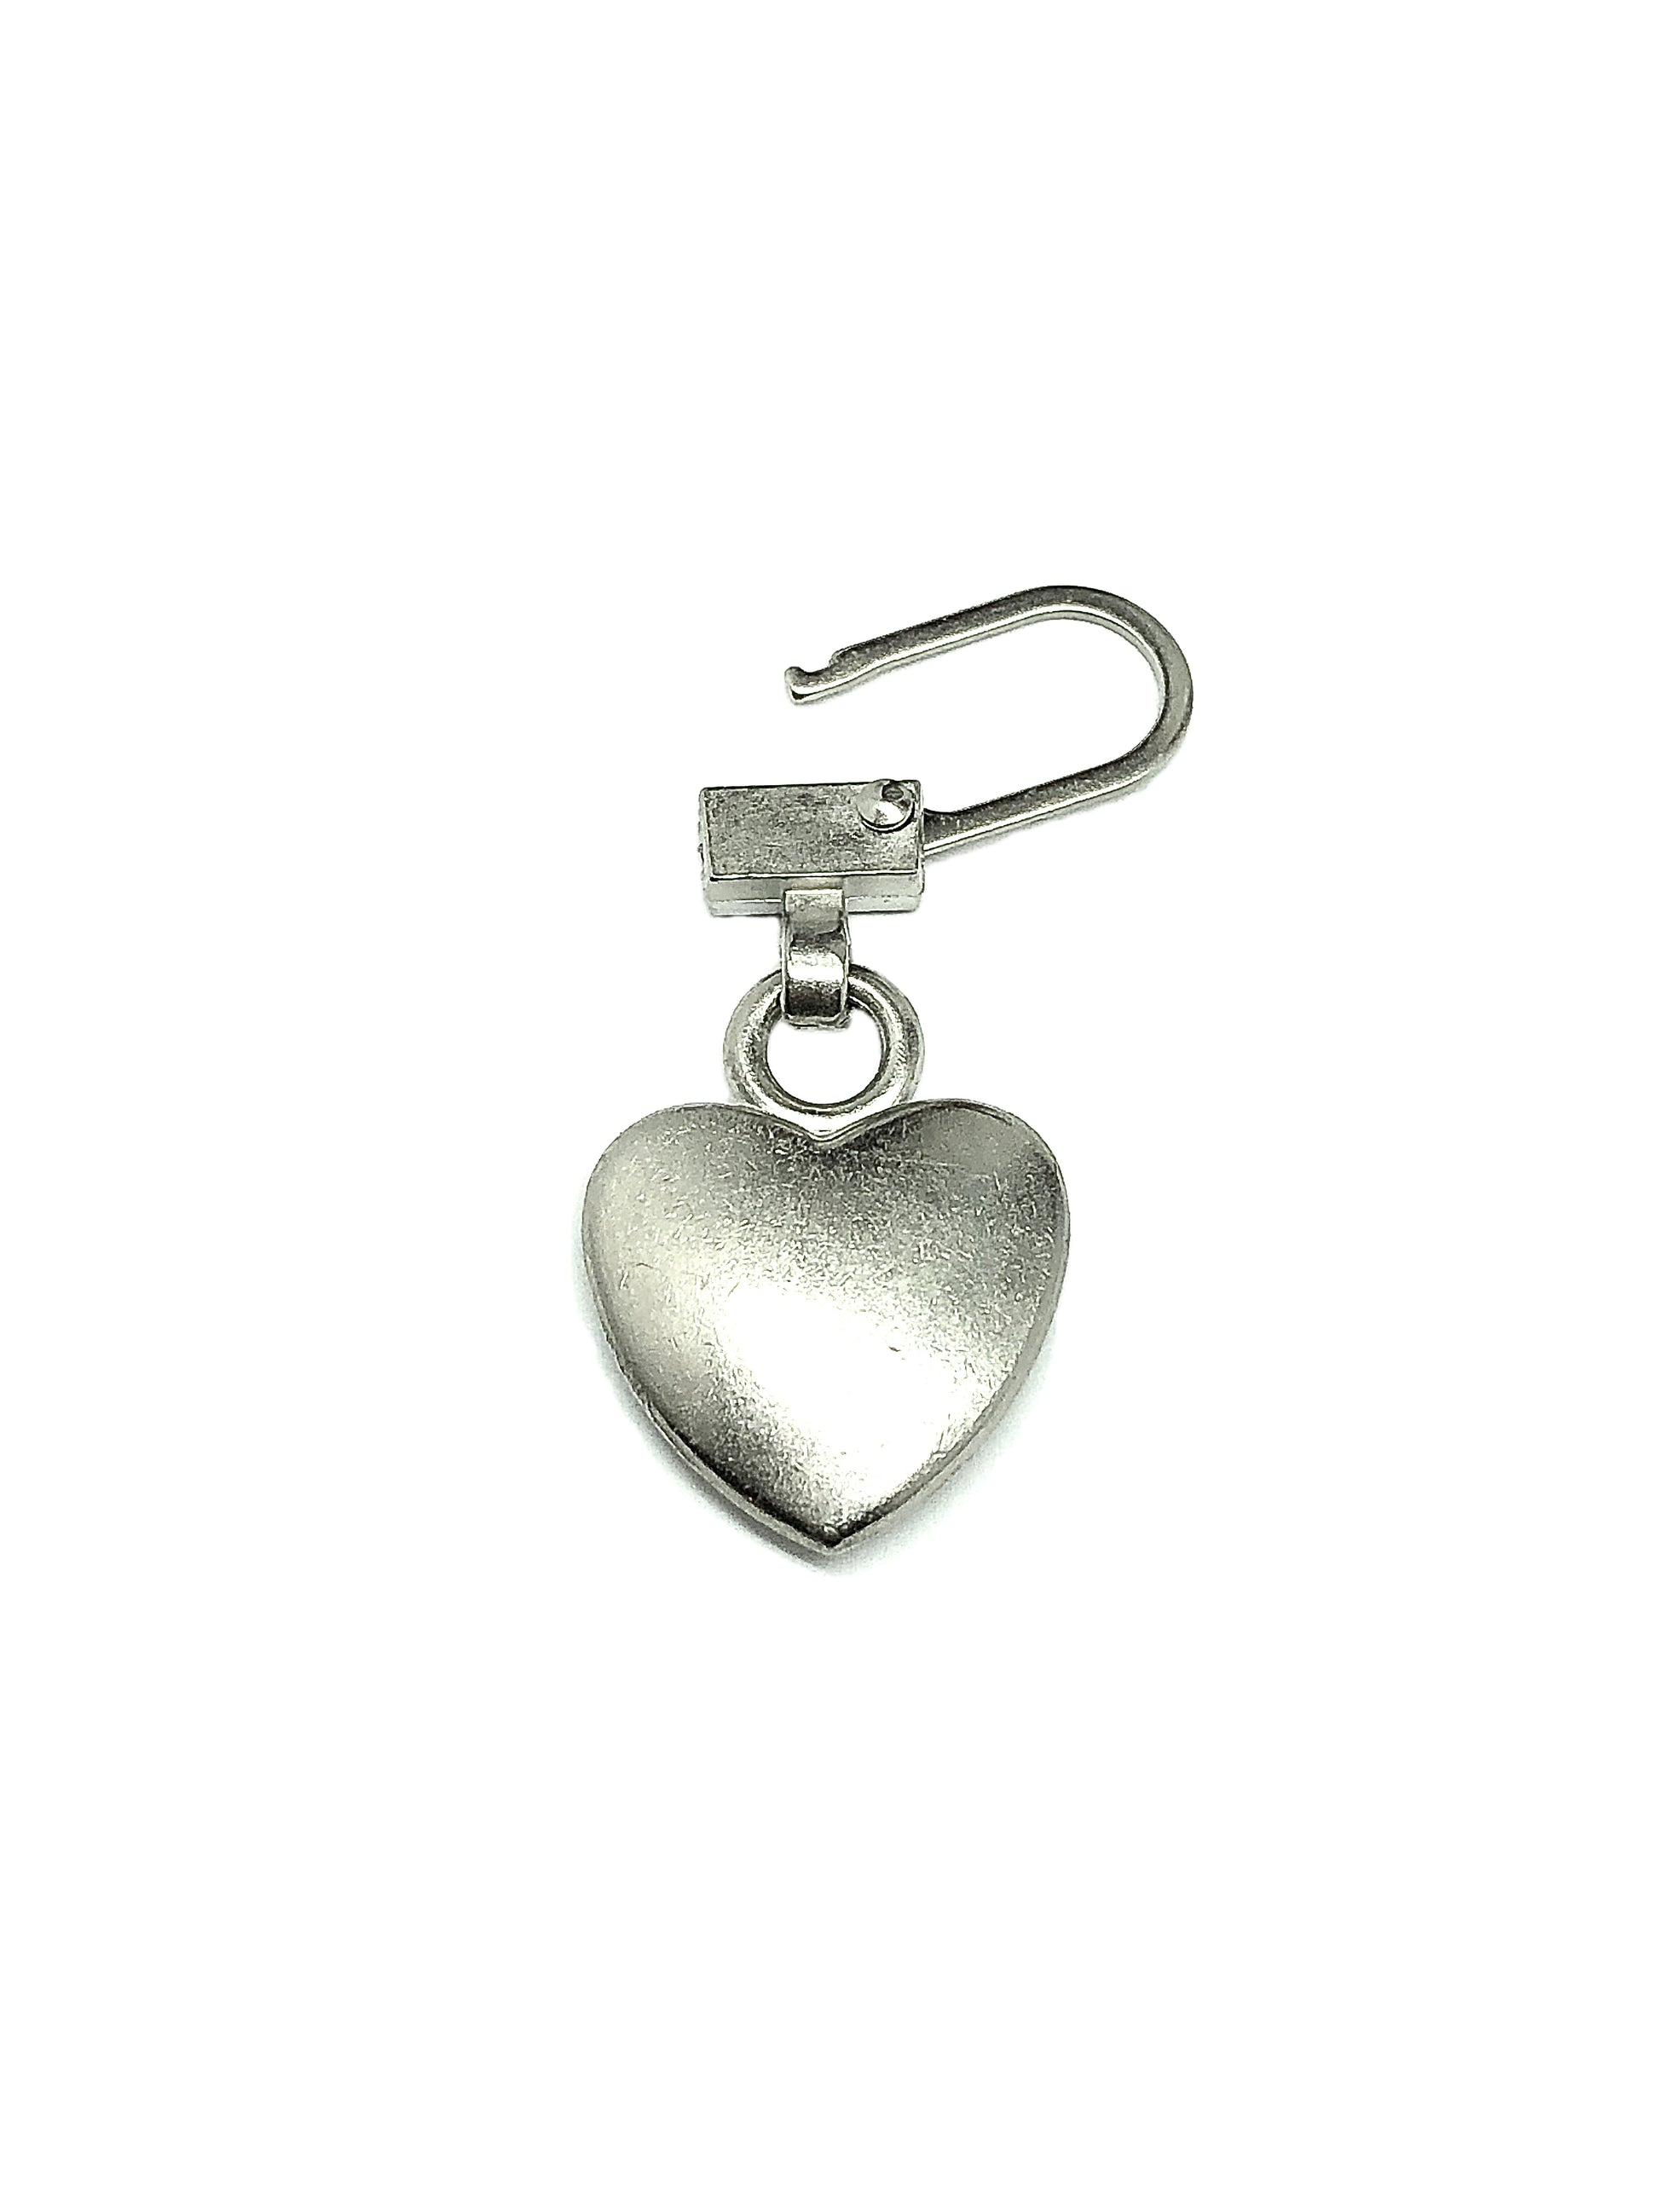 Zipper Repair Charm - Rustic Silver Heart Zipper Charm or Accessorize anything it can clip to! - Blingschlingers USA